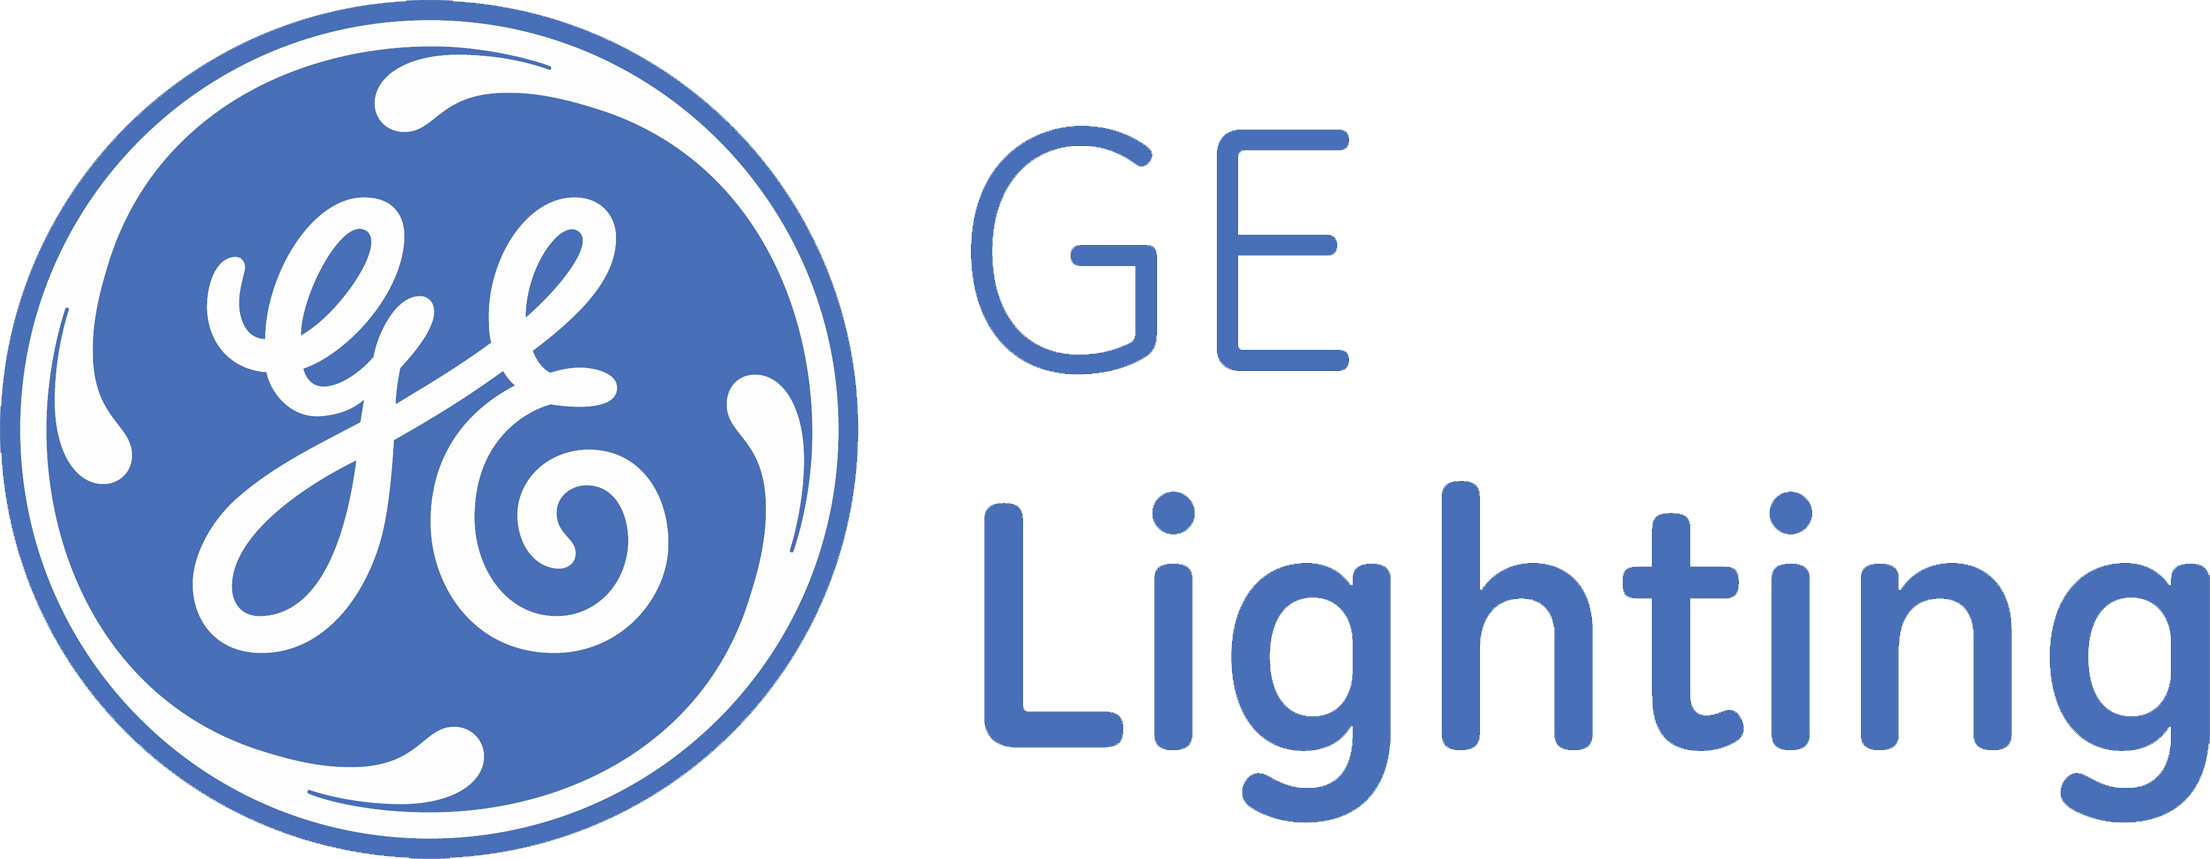 Lighting Providers BLT Direct Expand GE Lighting Range, Synonymous with Quality and Value